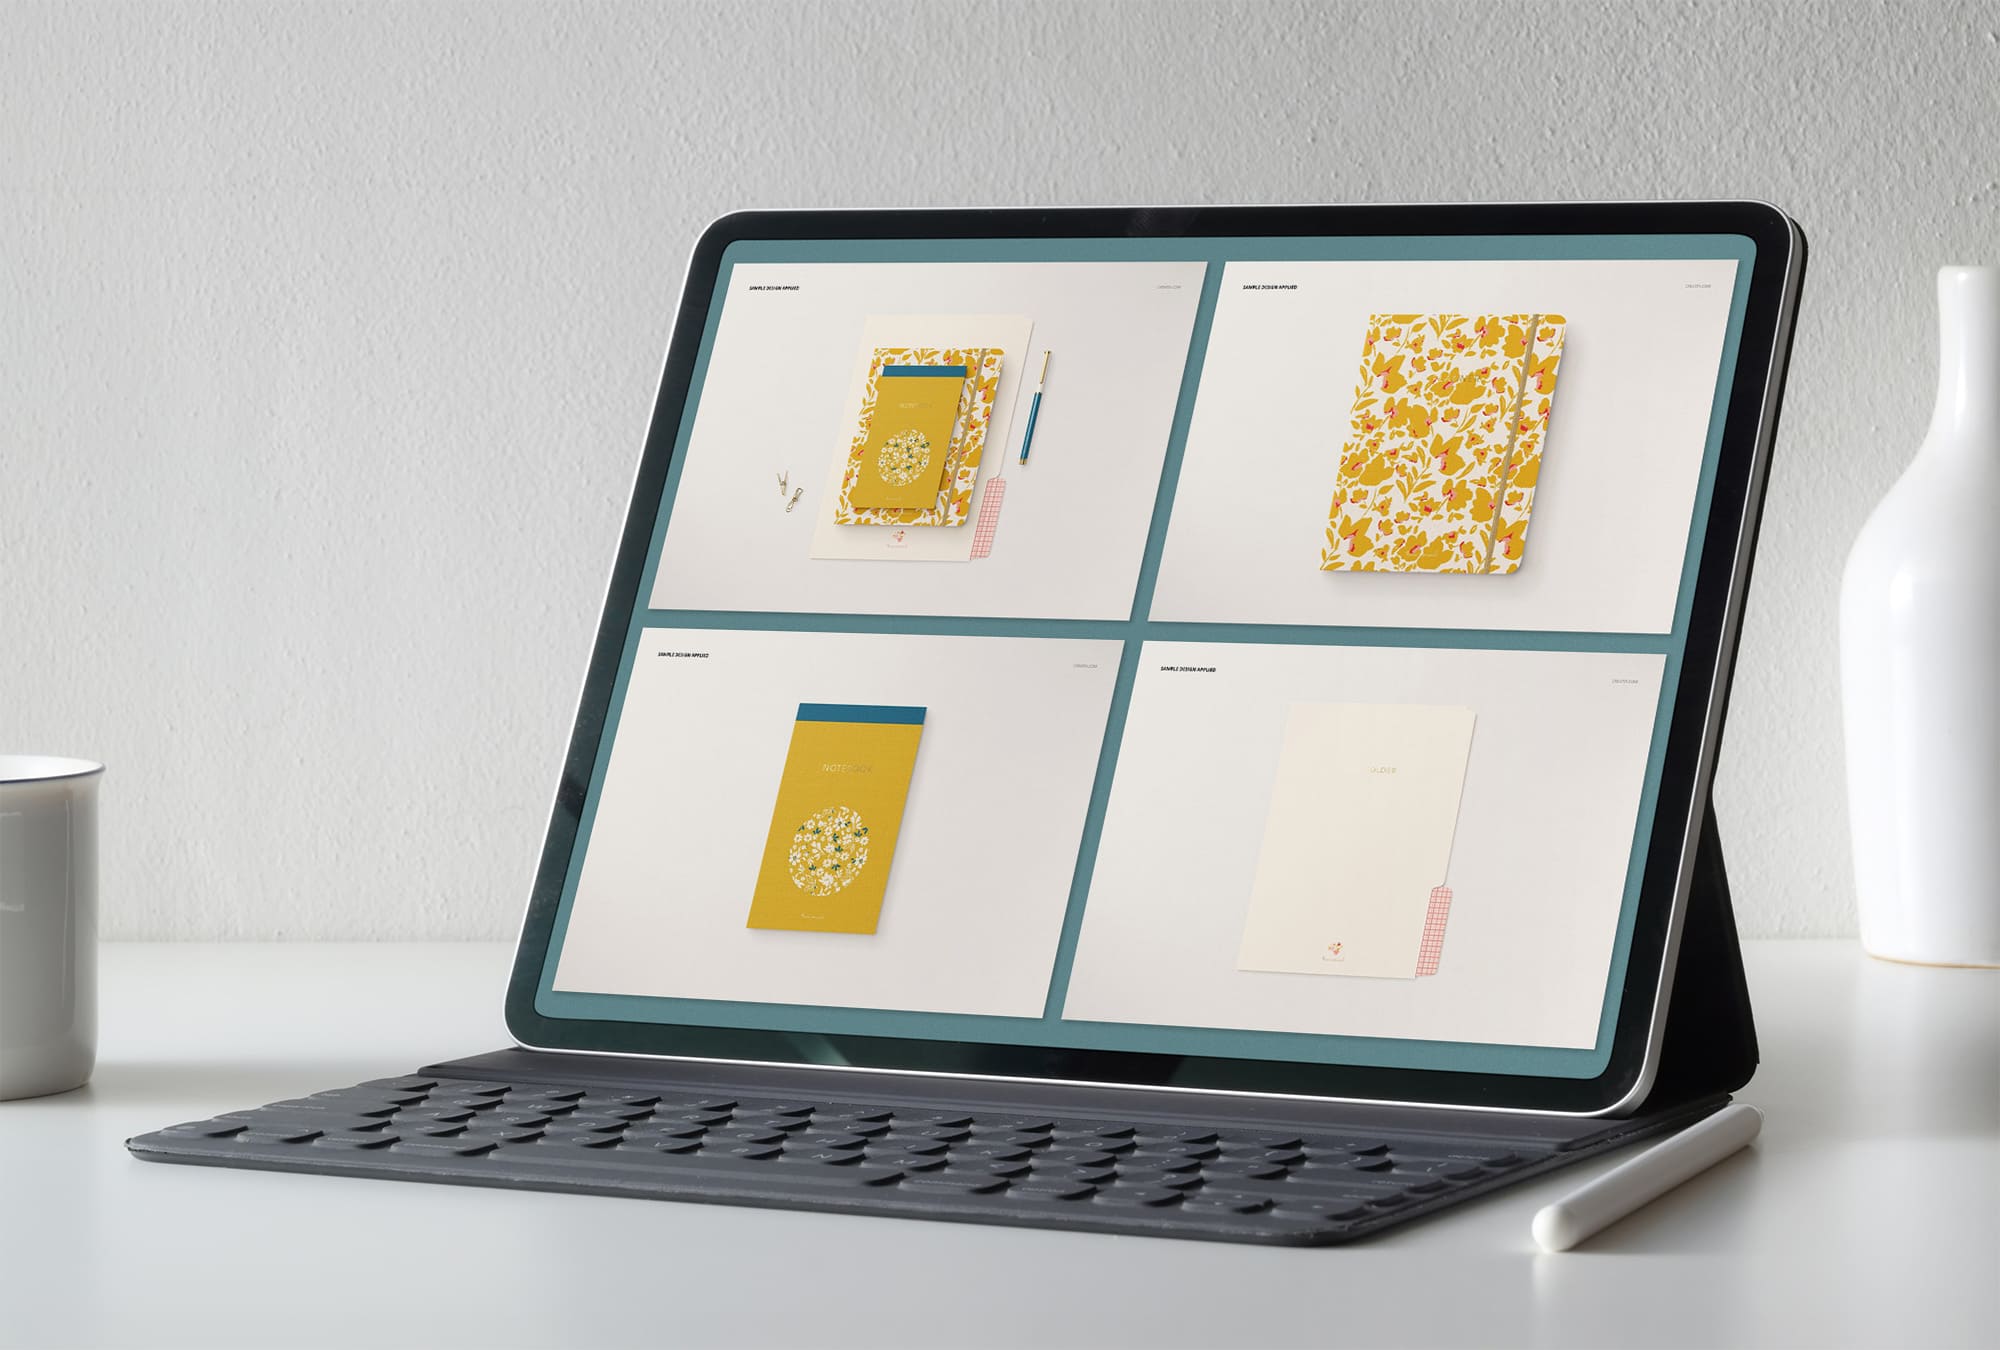 Tablet on screen with images of lovely stationery mockup.